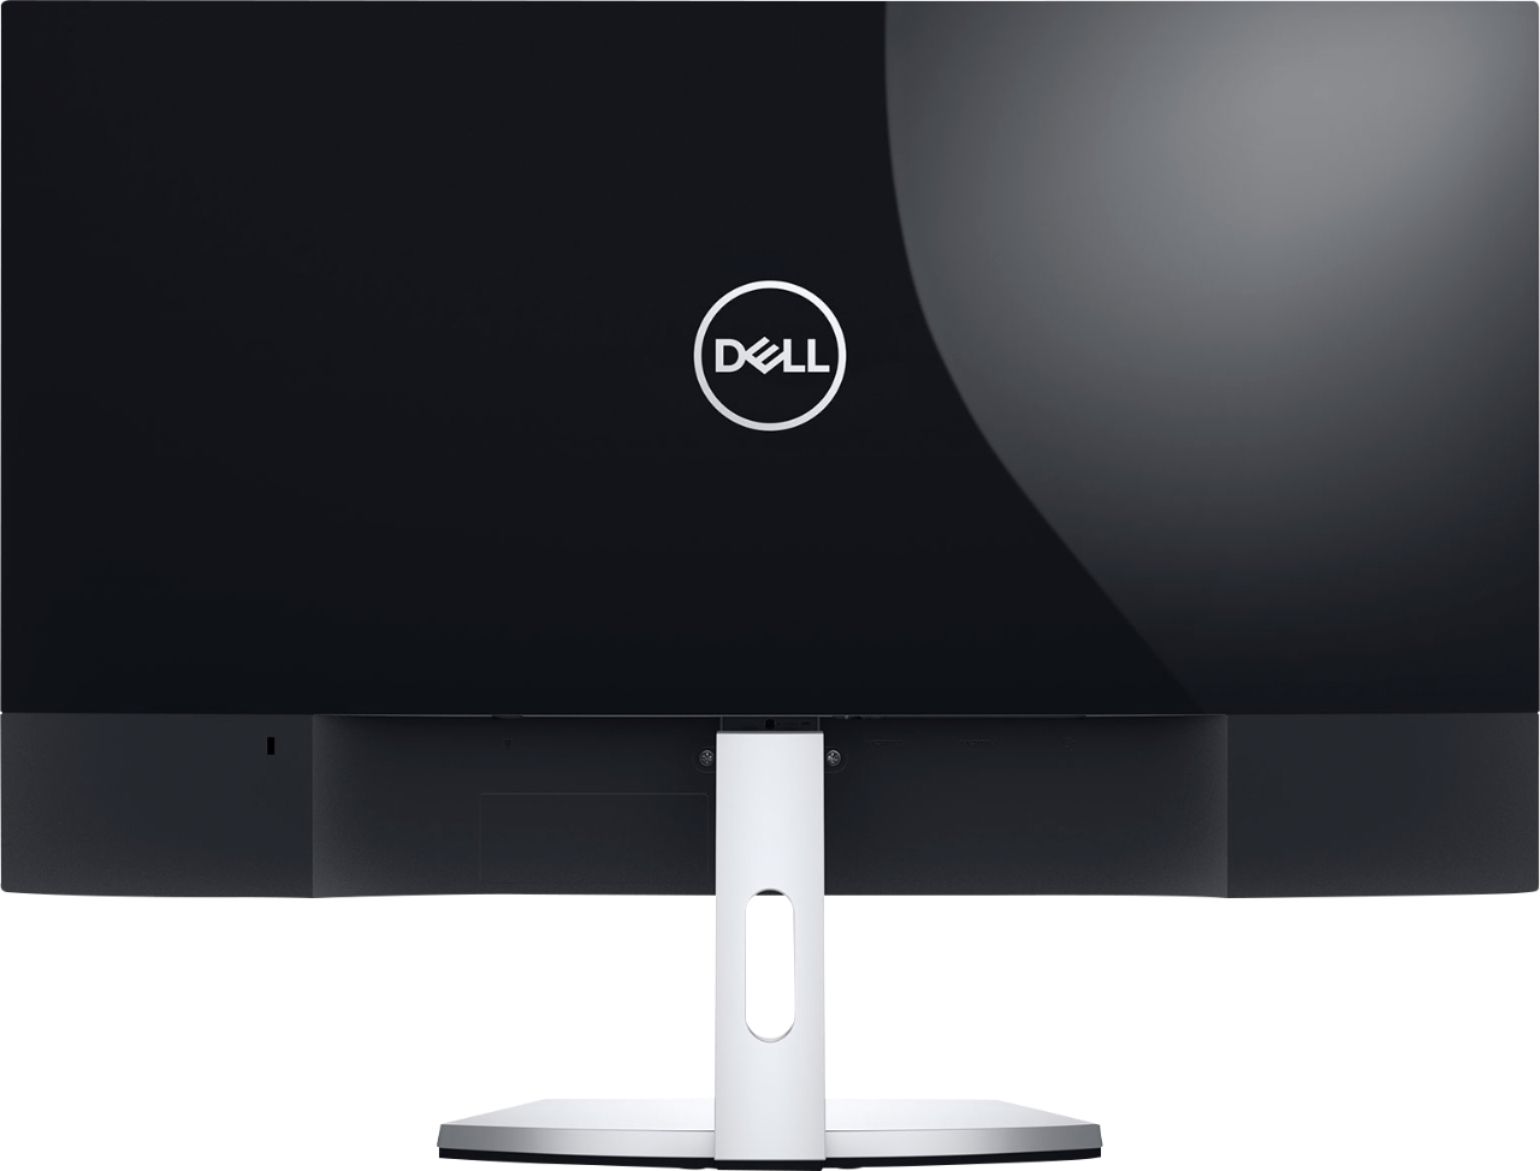 Back View: Dell - Geek Squad Certified Refurbished 27" IPS LED FHD Monitor - Black/Silver